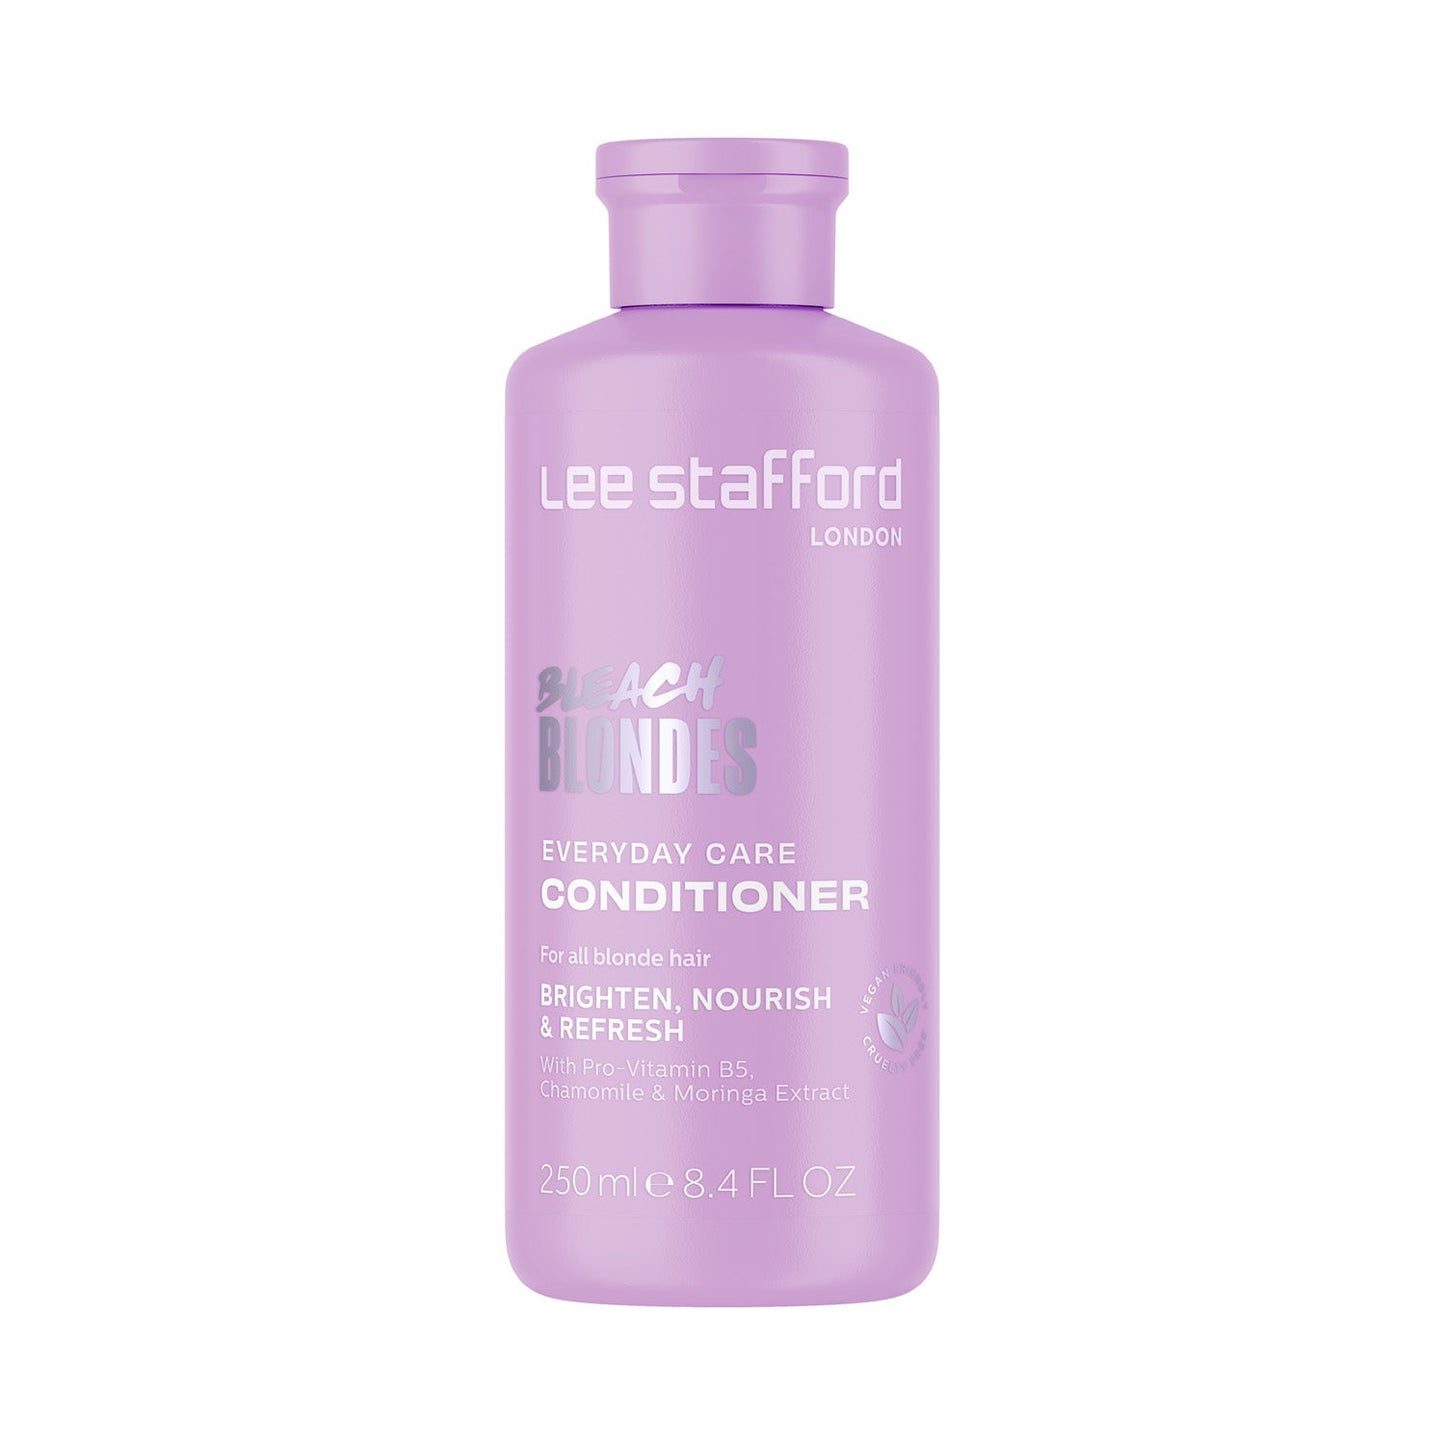 Bleach Blondes Everyday Care Conditioner